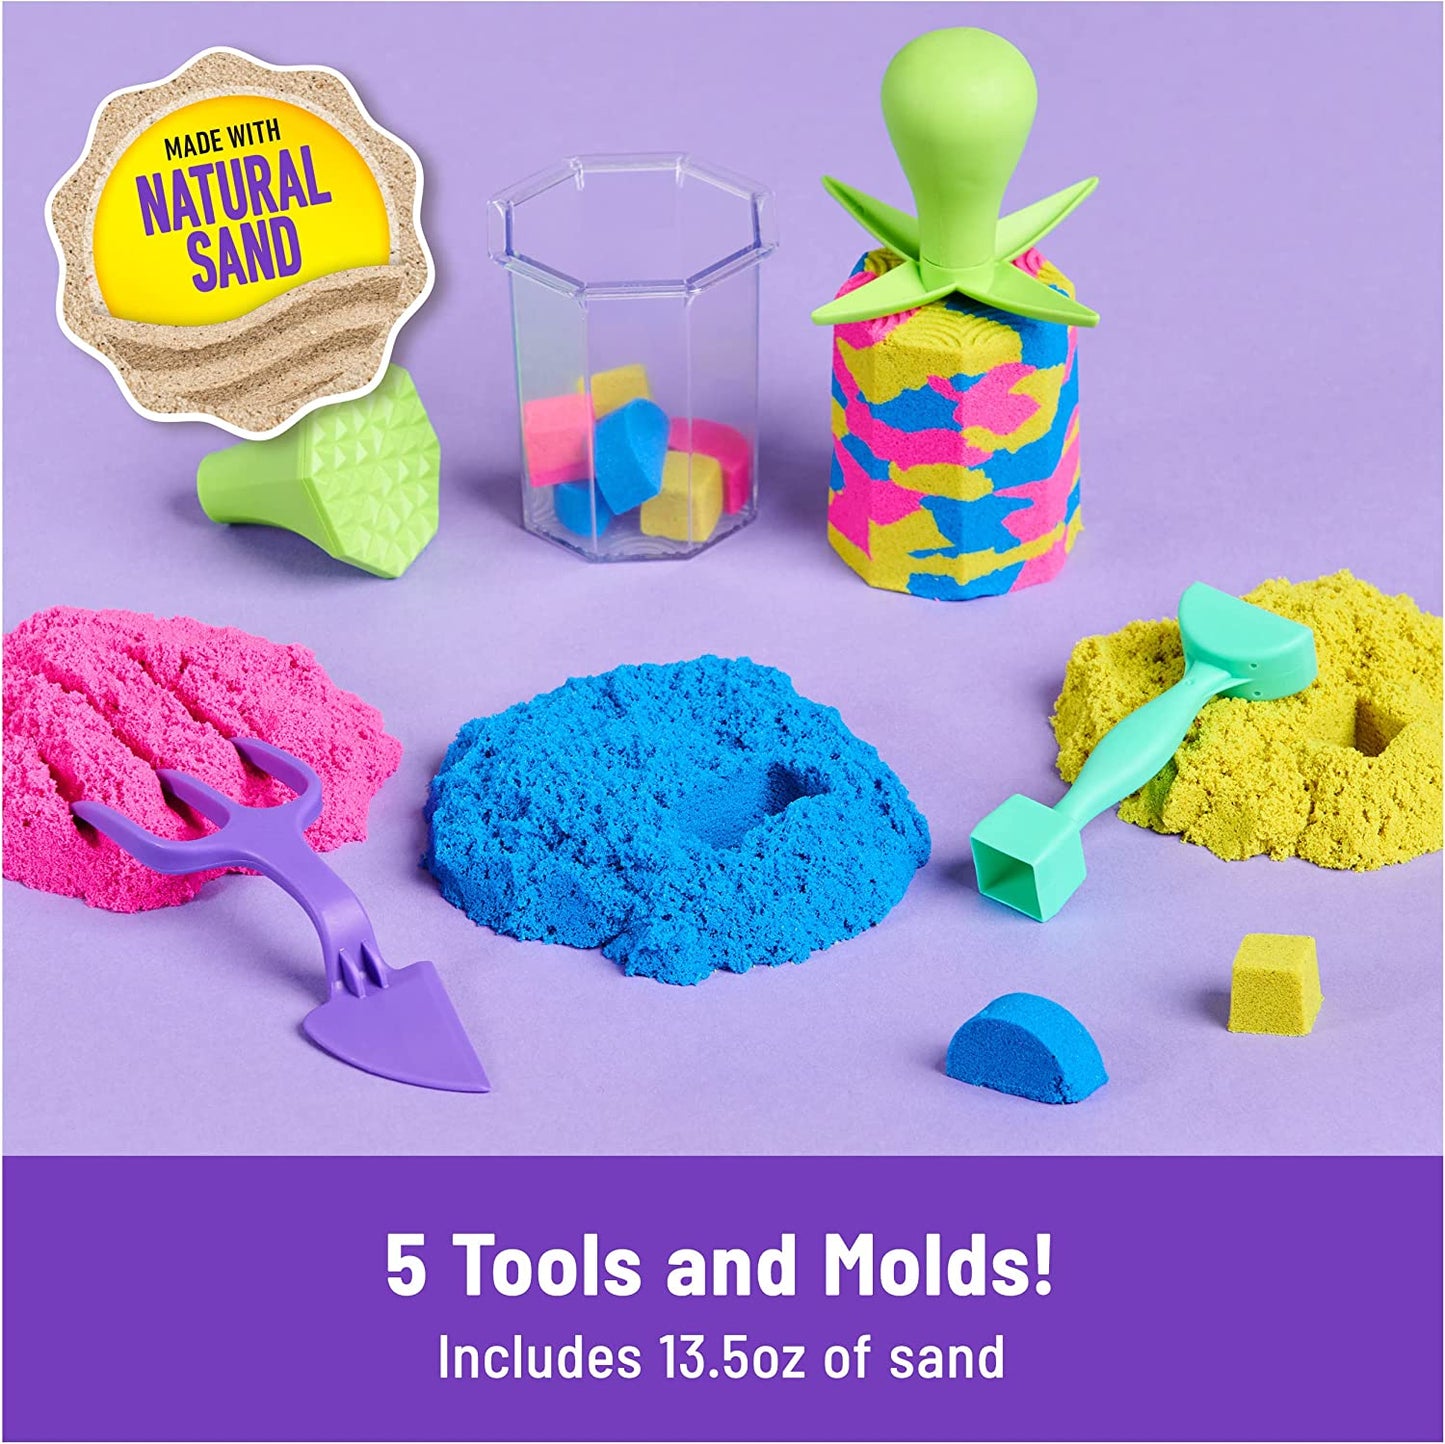 Kinetic Sand, Squish N’ Create Playset, with 13.5oz of Blue, Yellow, and Pink Play Sand, 5 Tools, Sensory Toys for Kids Ages 3 and Up